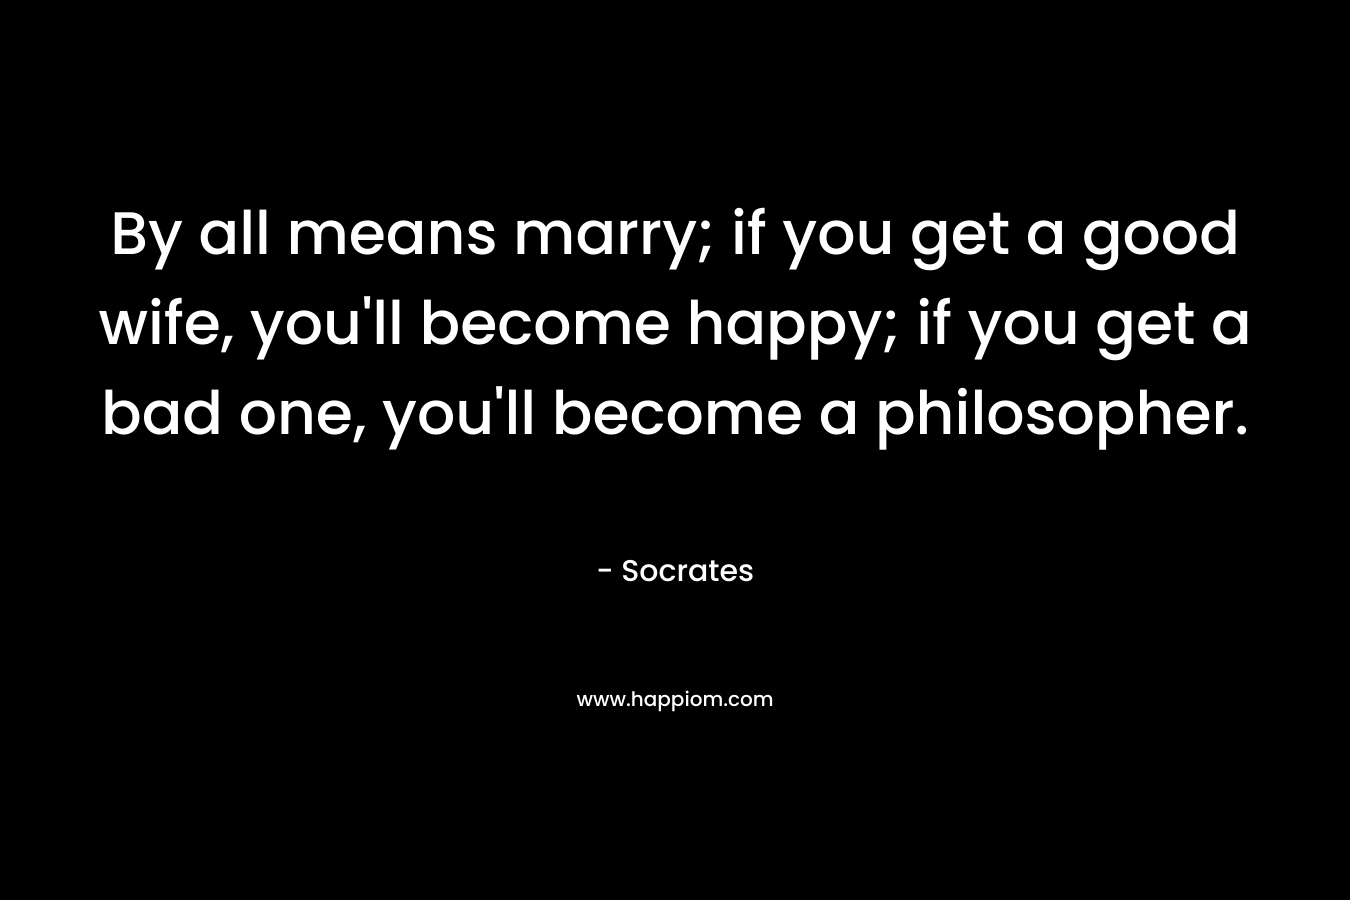 By all means marry; if you get a good wife, you’ll become happy; if you get a bad one, you’ll become a philosopher. – Socrates